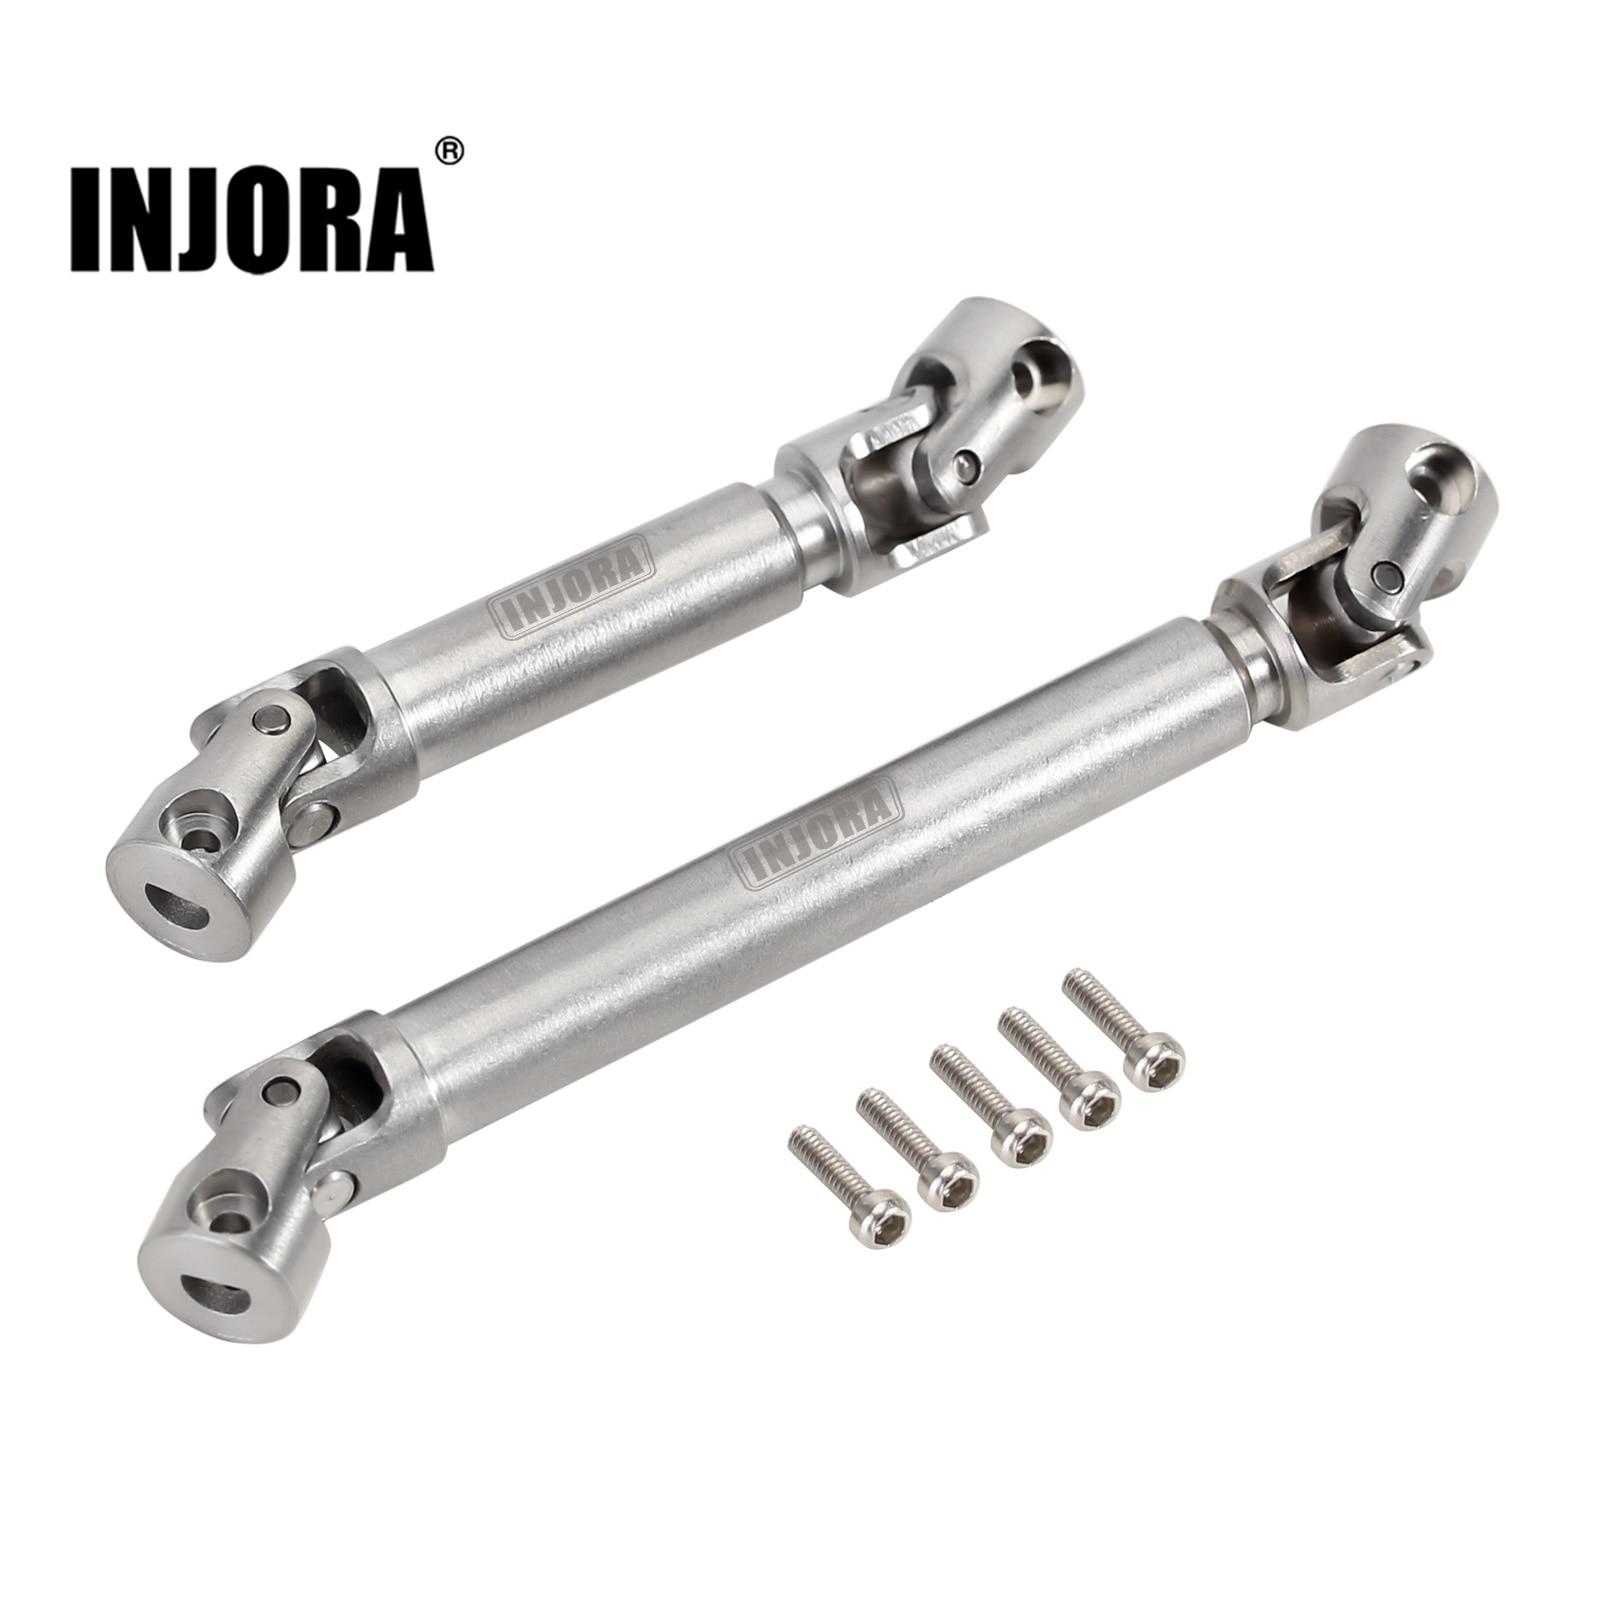 INJORA-Stainless-Steel-Center-Drive-Shaft-D-Shaped-for-1-24-RC-Crawler-Axial-SCX24-Jeep.jpg